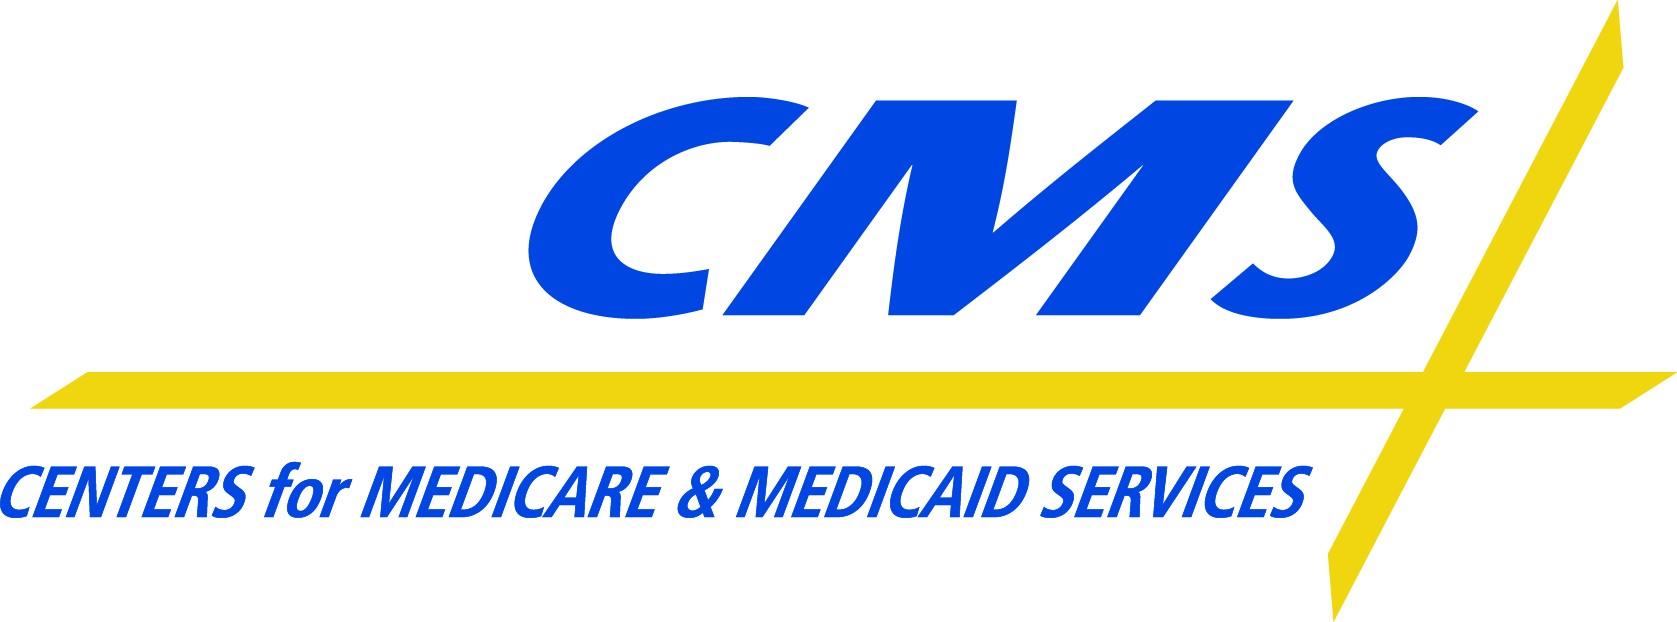 Centers for medicare and medicaid services ratings epicor software email format